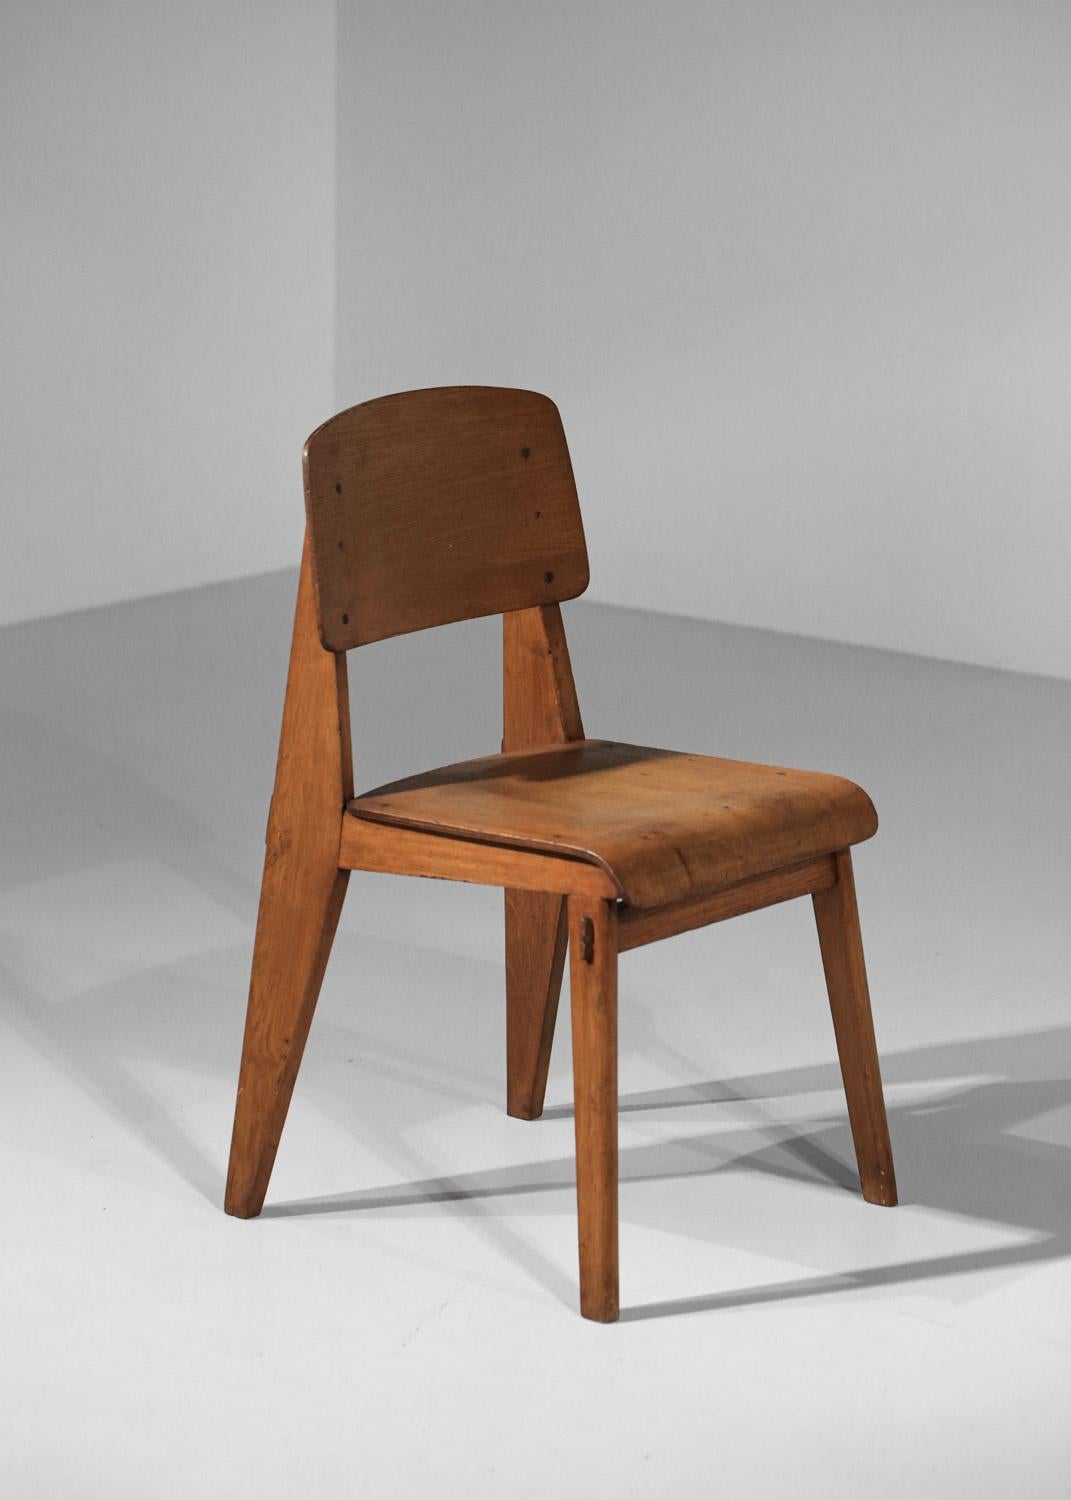 Mid-20th Century rare Pair of Jean Prouvé all-wood chairs 1950's French design  For Sale